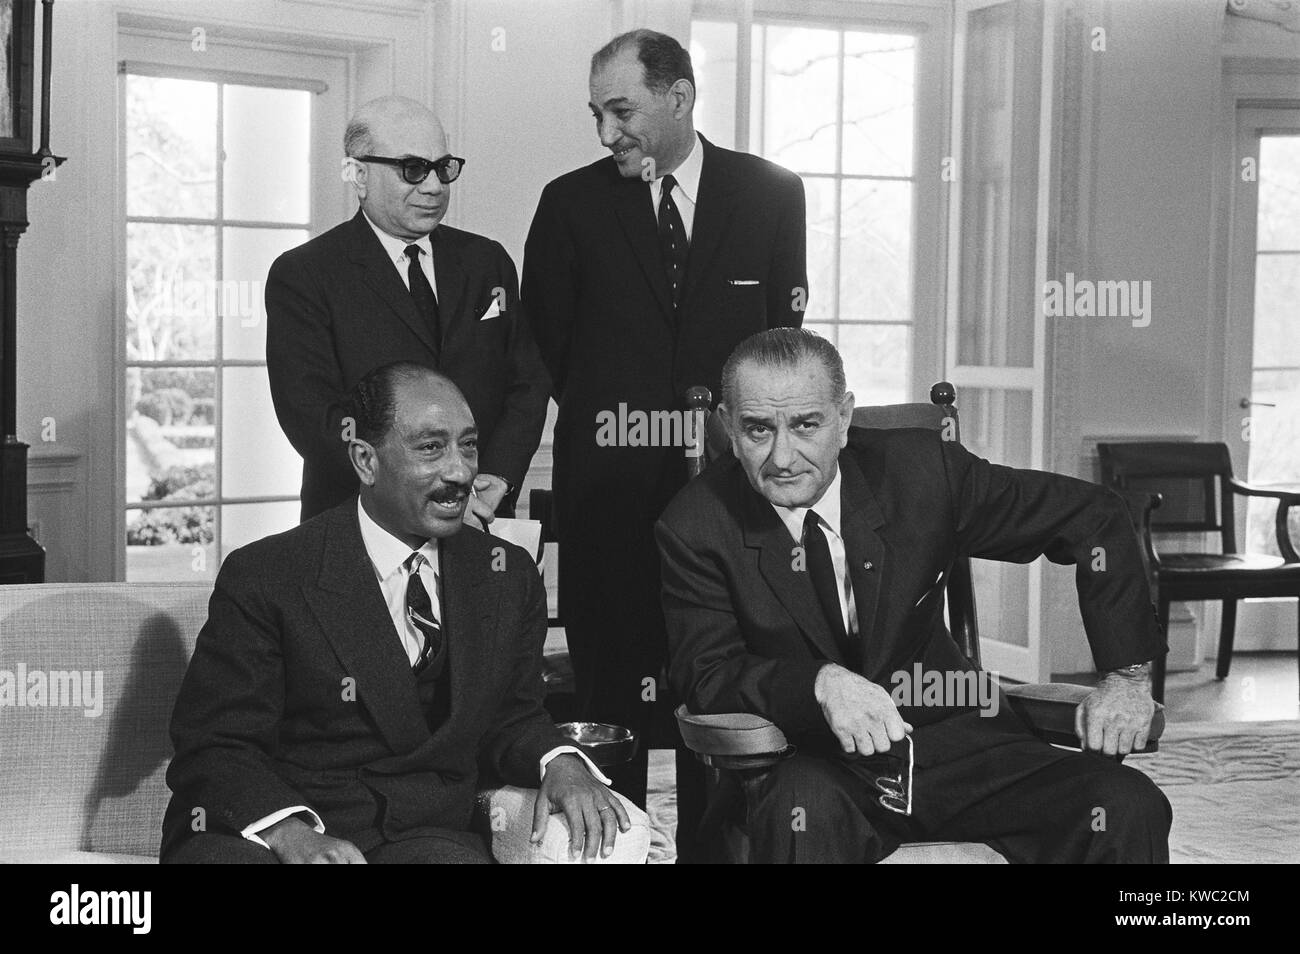 President Lyndon B. Johnson, seated with Anwar Sadat, in the Oval Office, Feb.2, 1966. Sadat was then President of the National Assembly of the United Arab Republic, and succeeded Nasser in 1970. (BSLOC 2015 2 217) Stock Photo